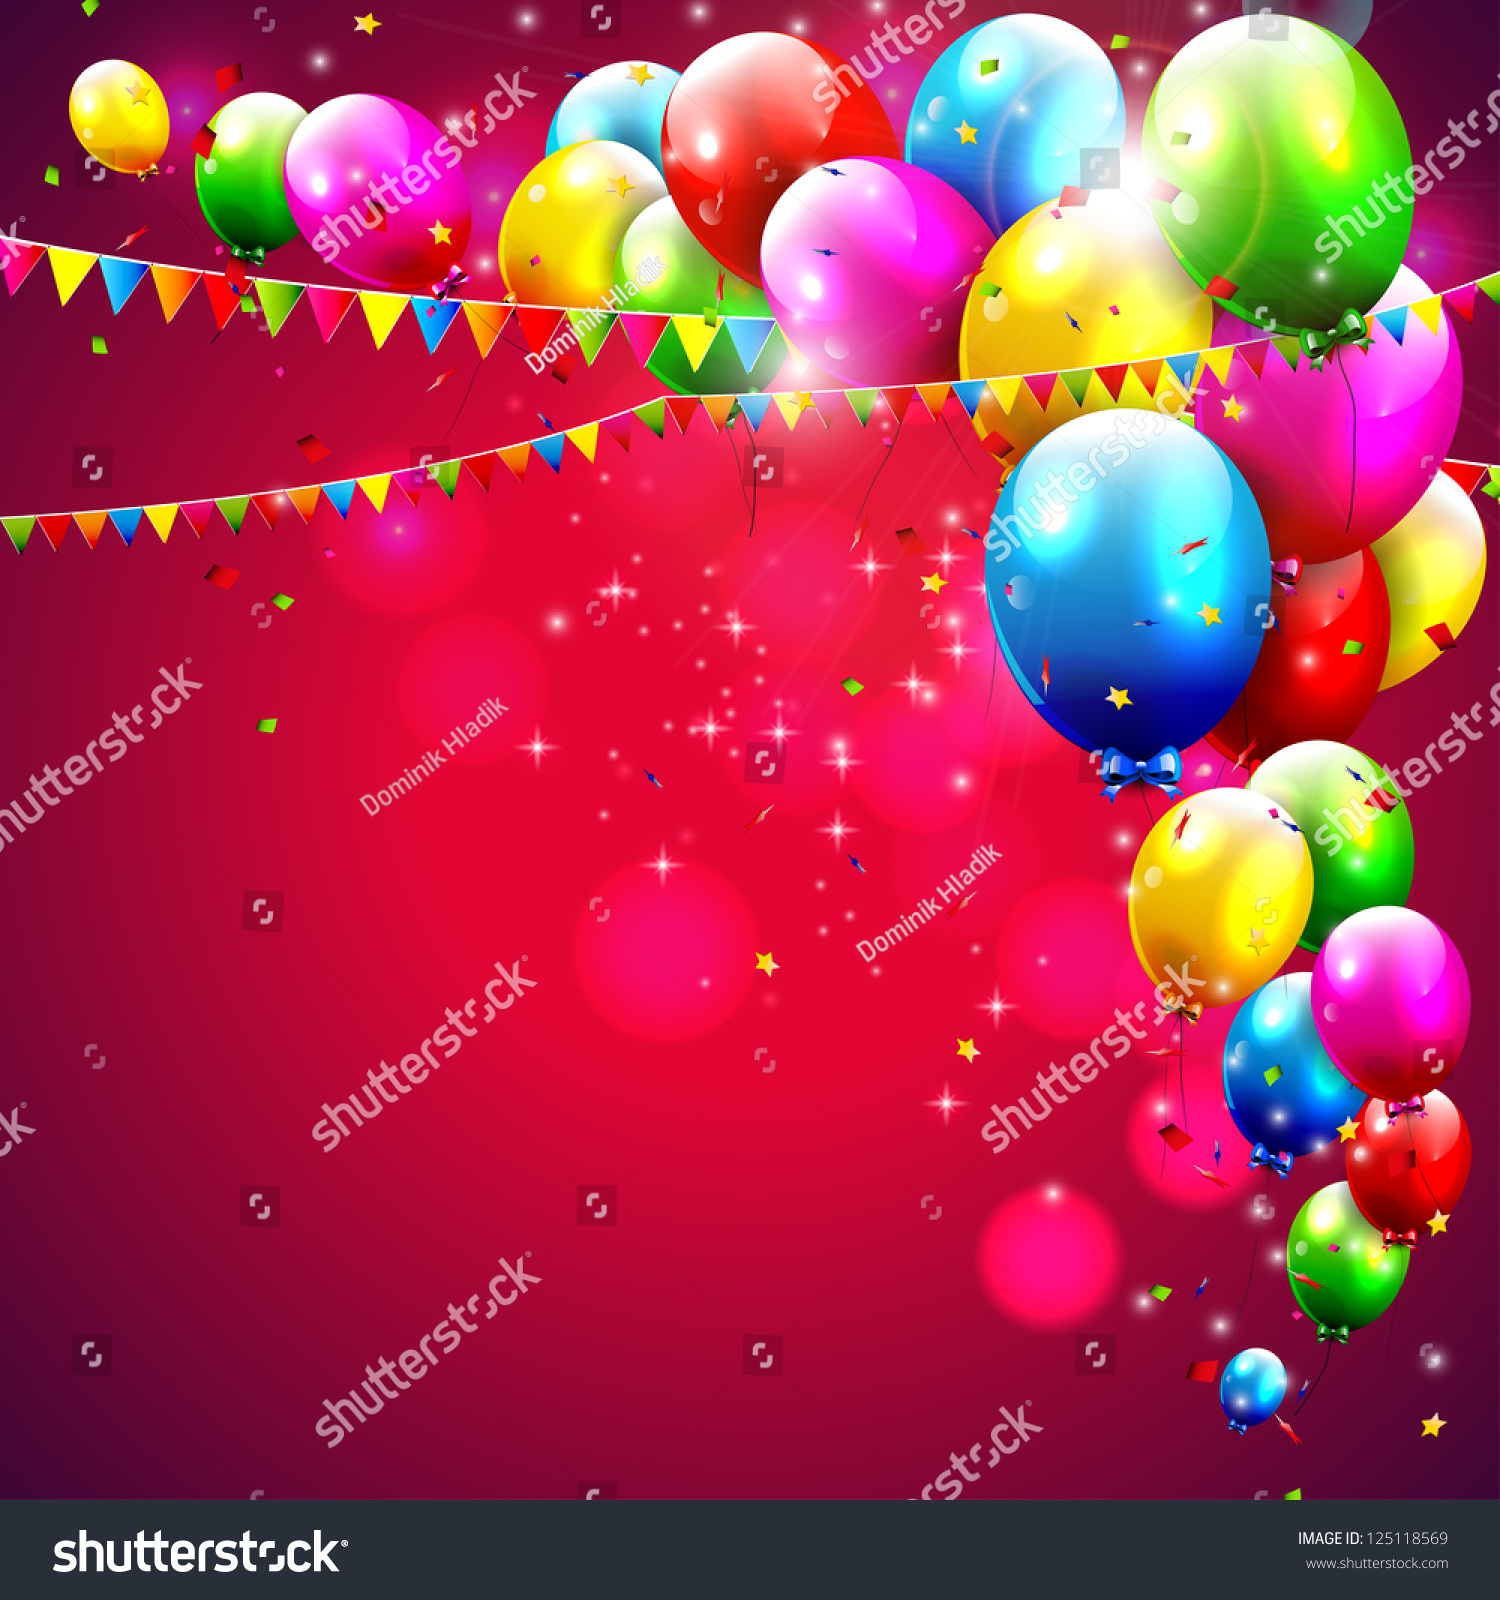 Colorful Birthday Balloons On Red Background Stock Vector (Royalty Free ...